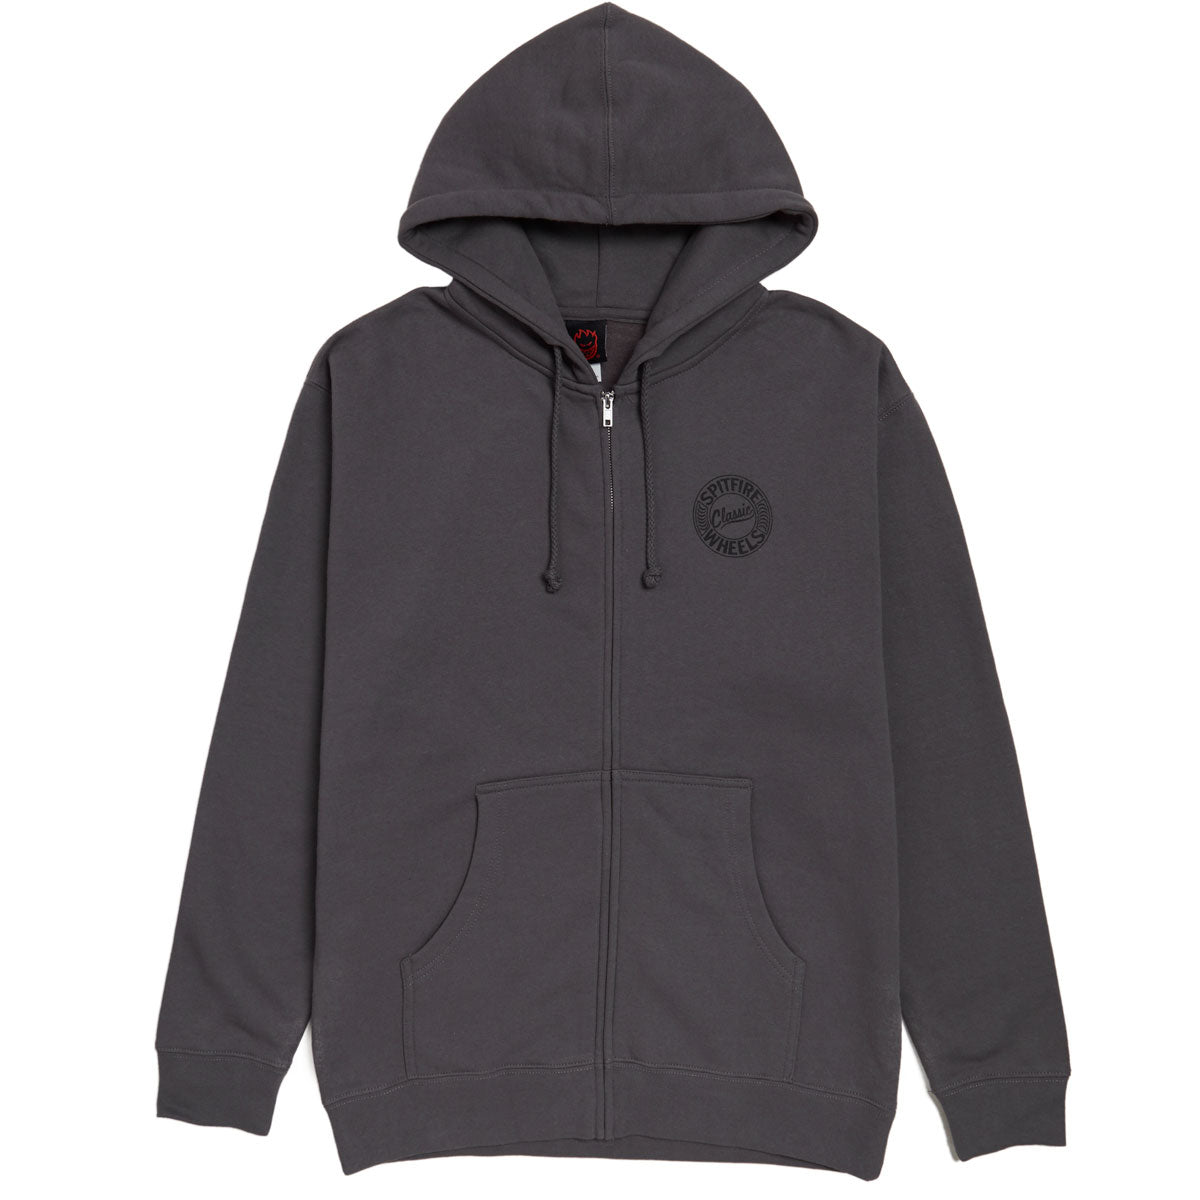 Spitfire Flying Classic Zip Up Hoodie - Charcoal – CCS